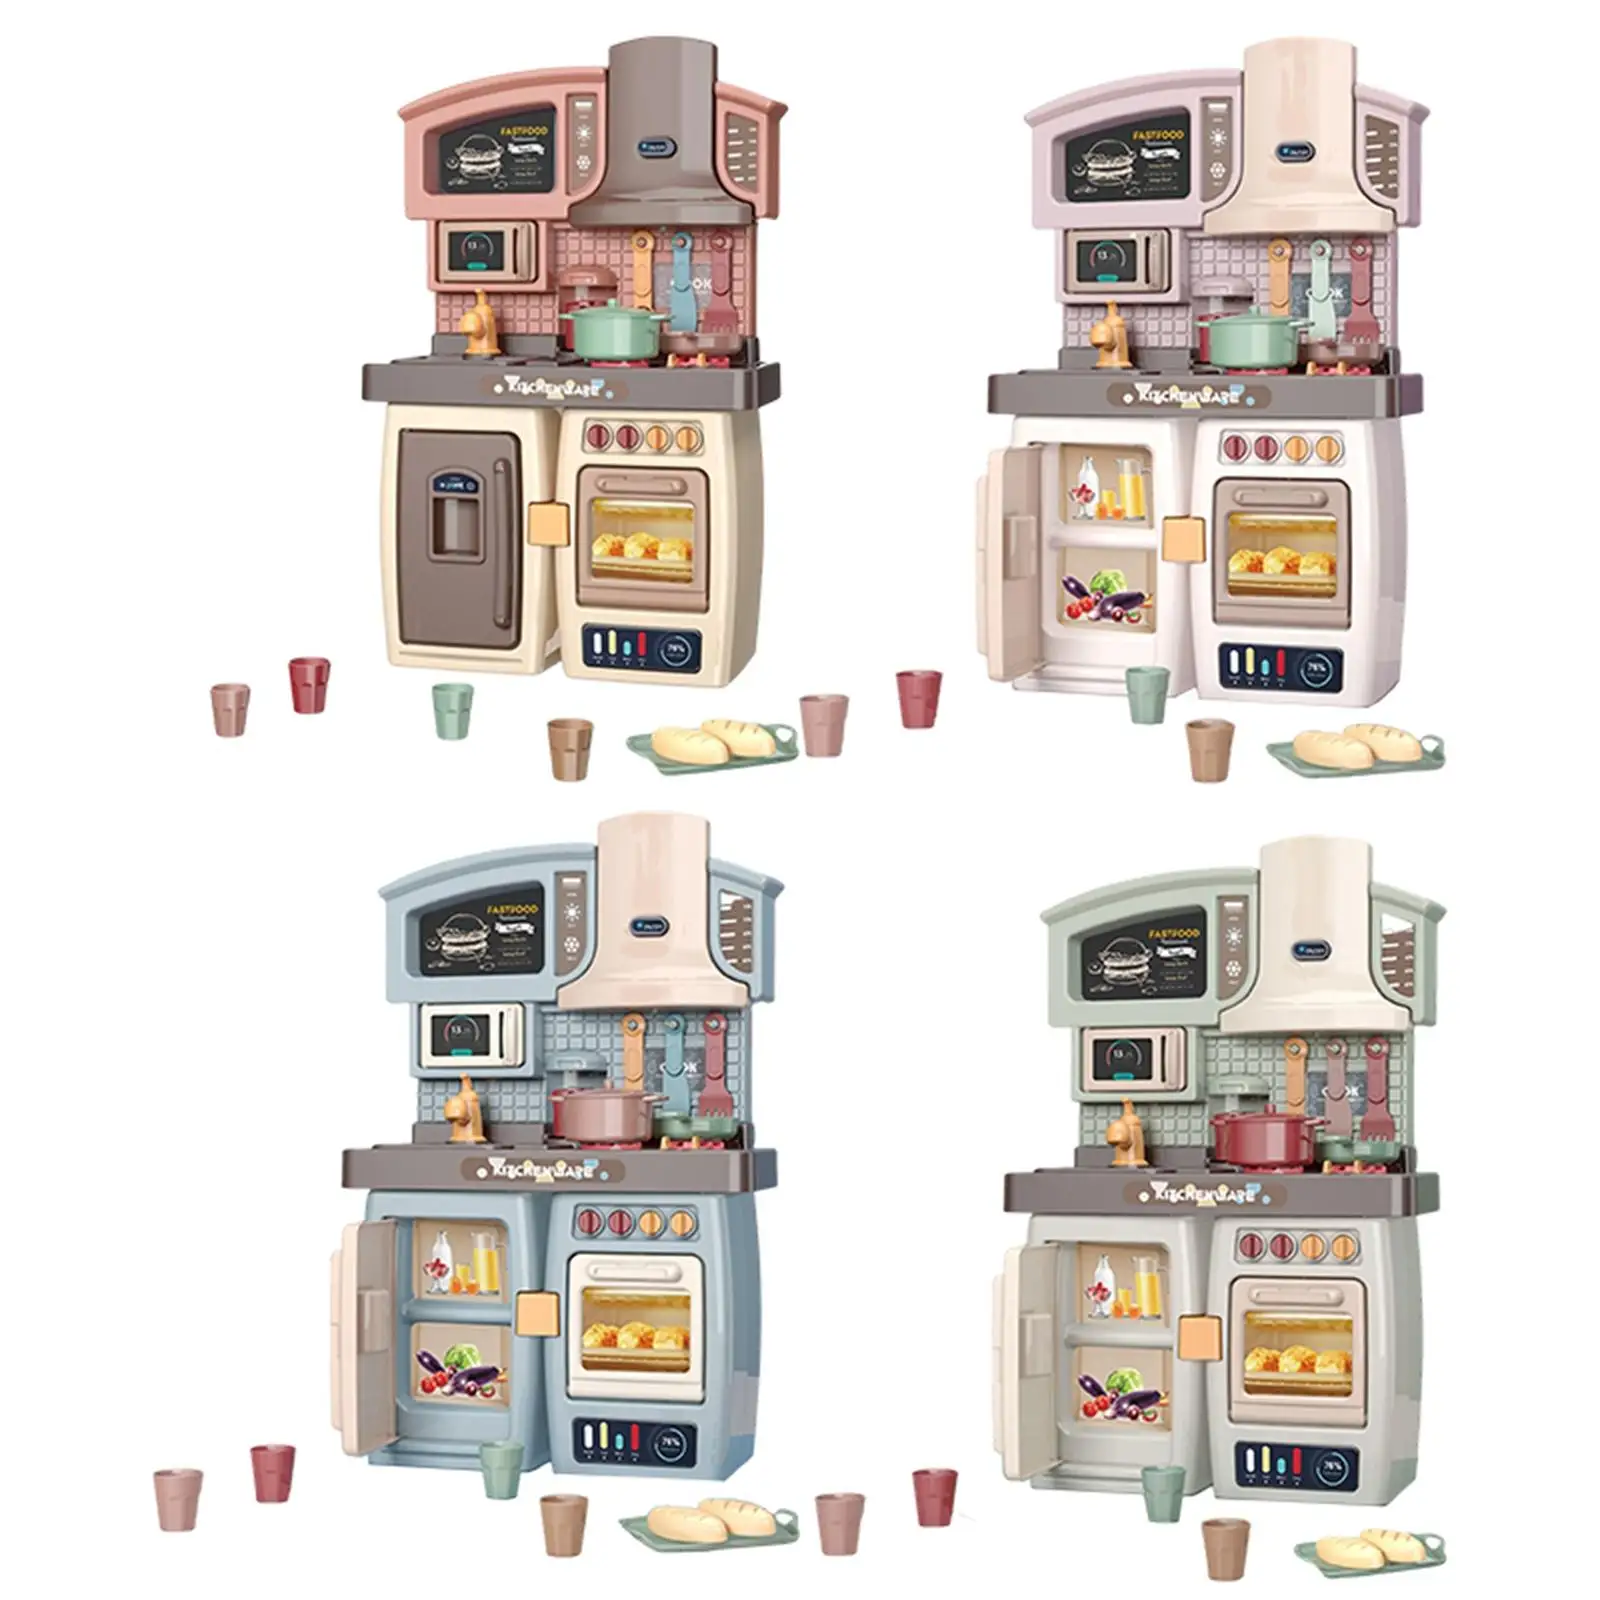 Kids Kitchen Playset Simulation Educational Cook Appliances Play Kitchen Set for Birthday Interactive Game Ceremony Boys Girls